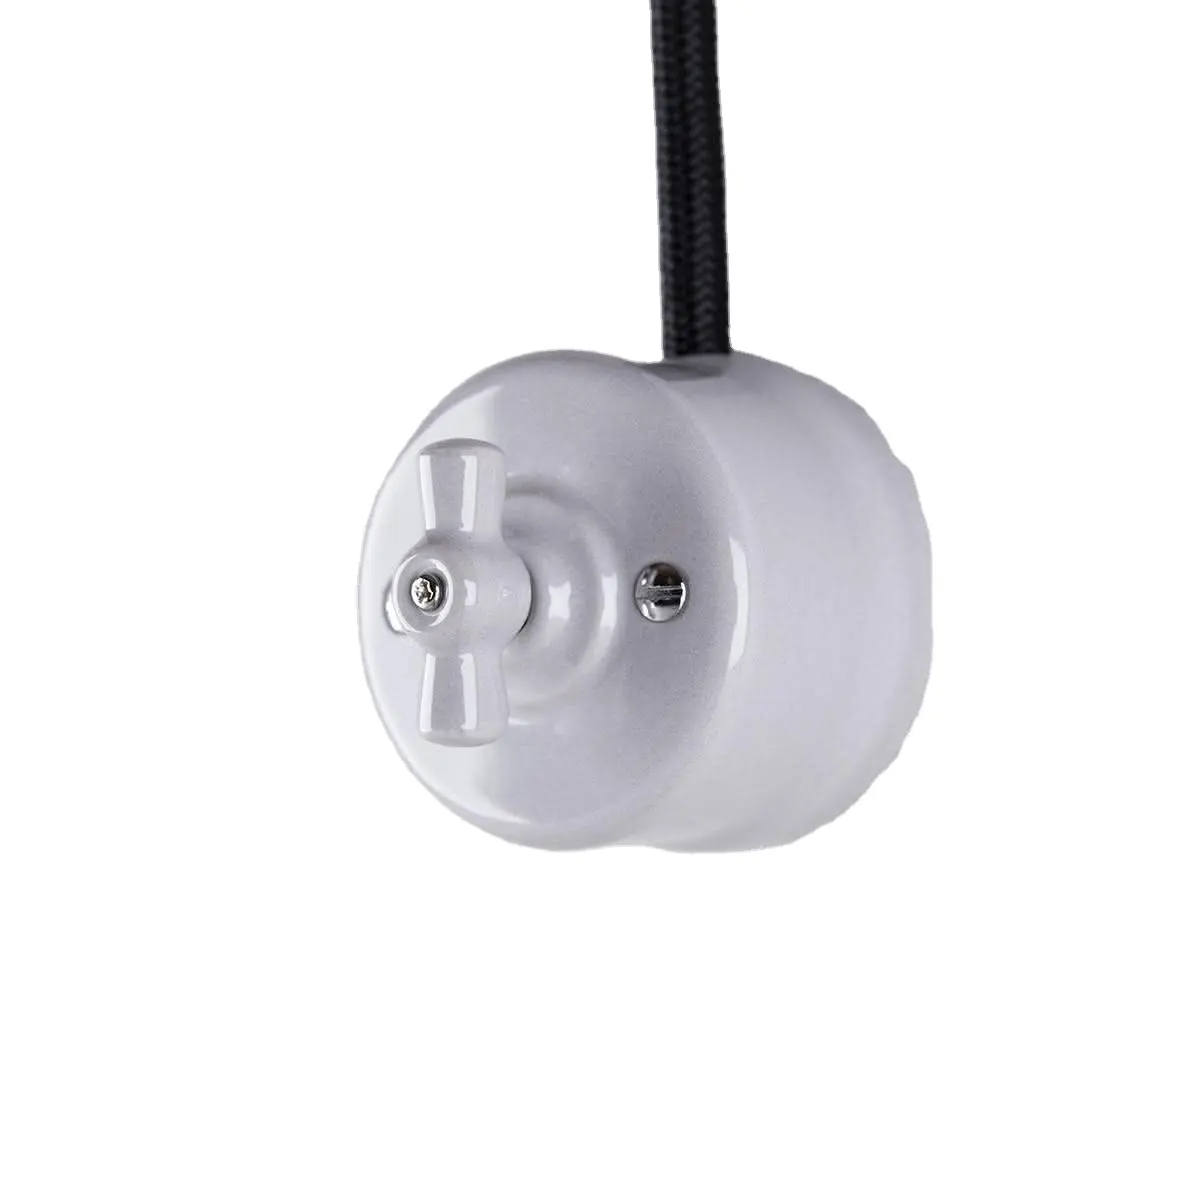 Porcelain Rotary Switches And Vintage Electrical Ceramic Wall Switches Single 2 Way Double 1 Way And Crossing Light Switch